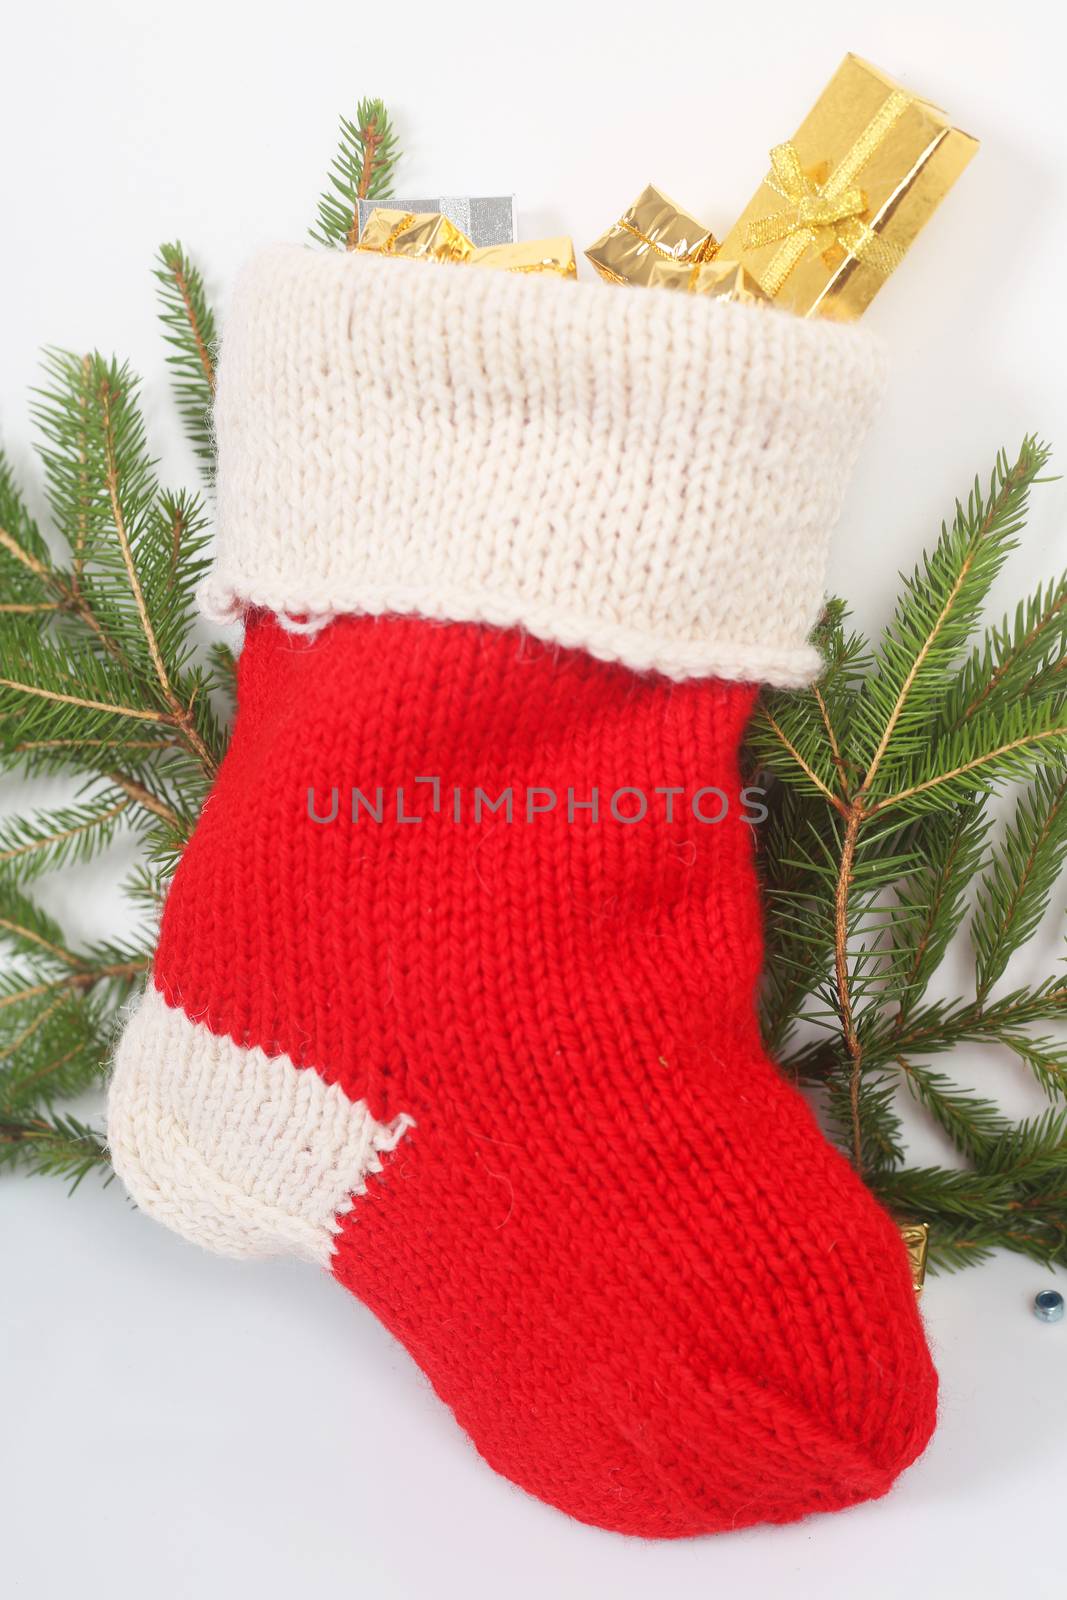 Red Christmas sock with gifts on white background